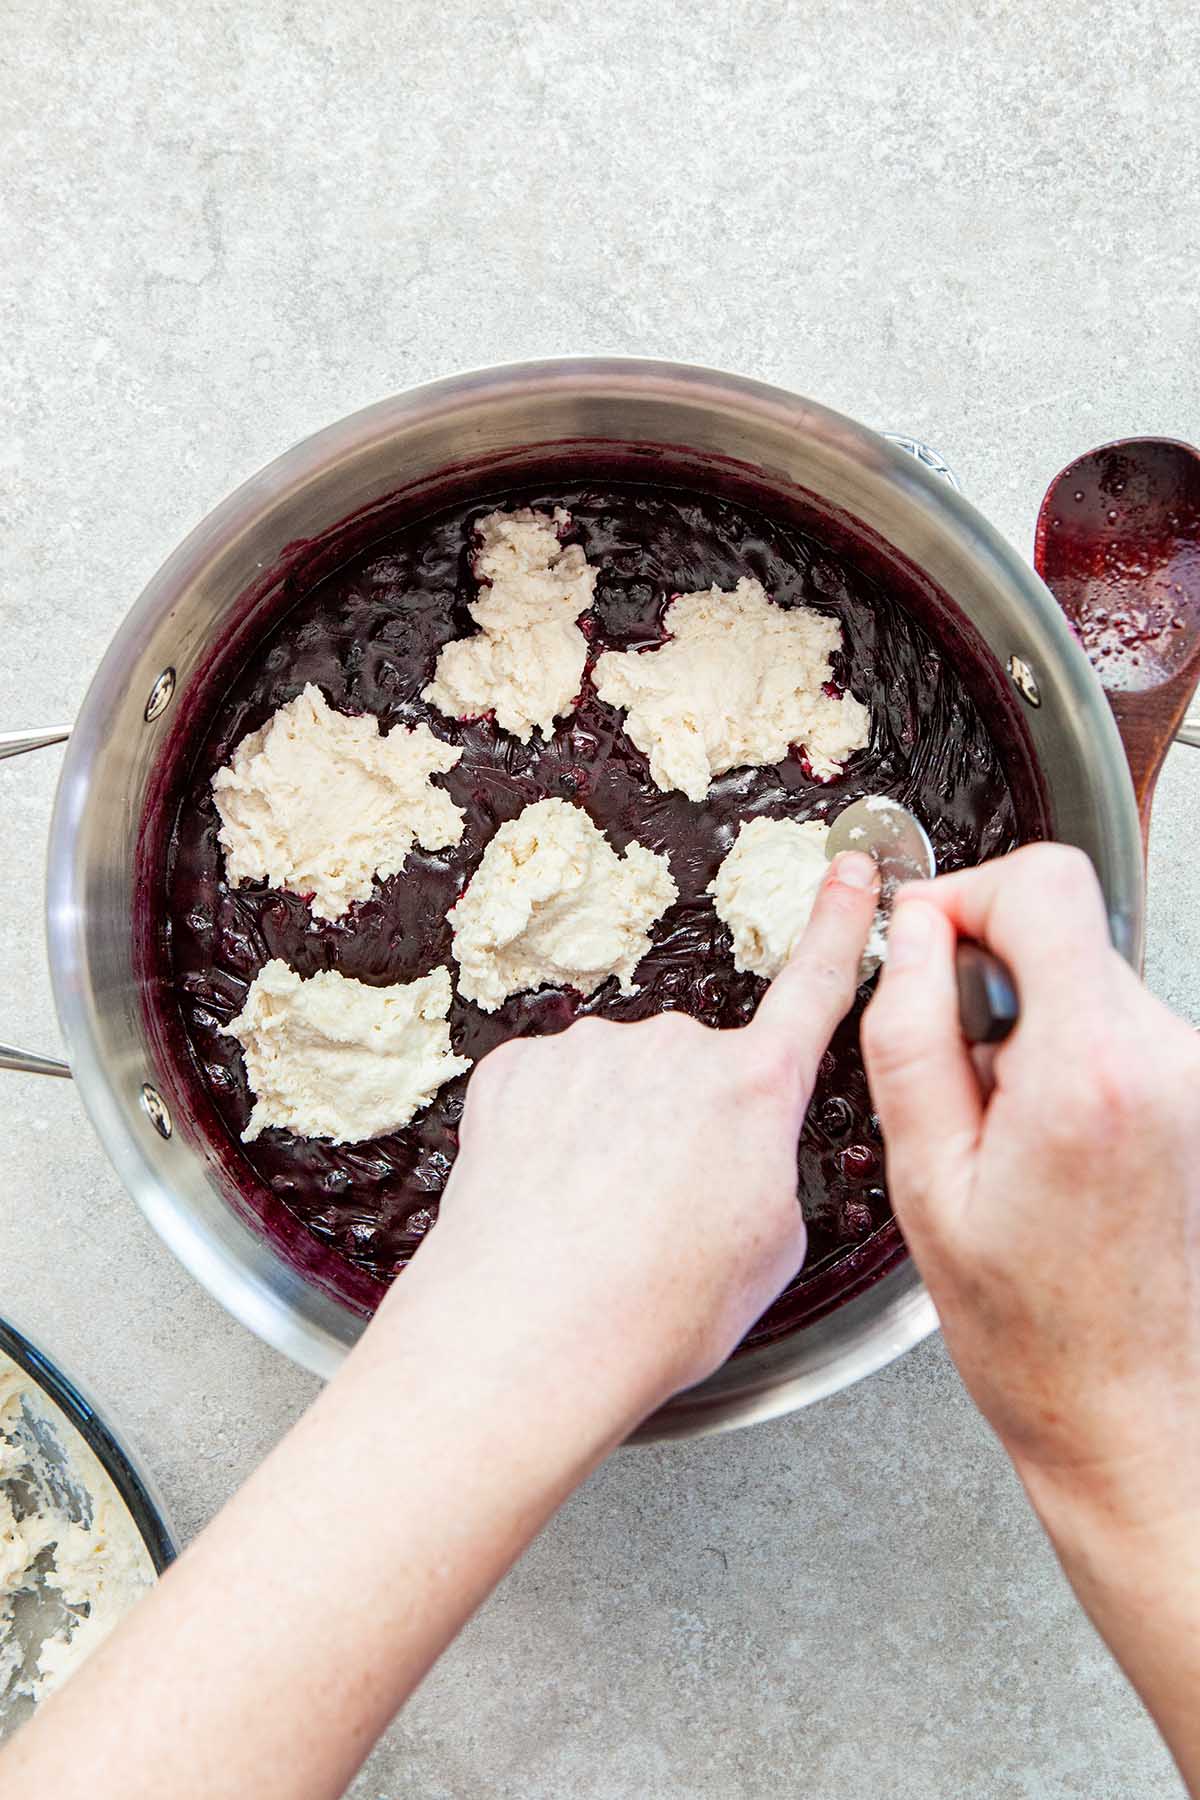 Hands scraping biscuit dough from a spoon into a pot of cooked blueberries.